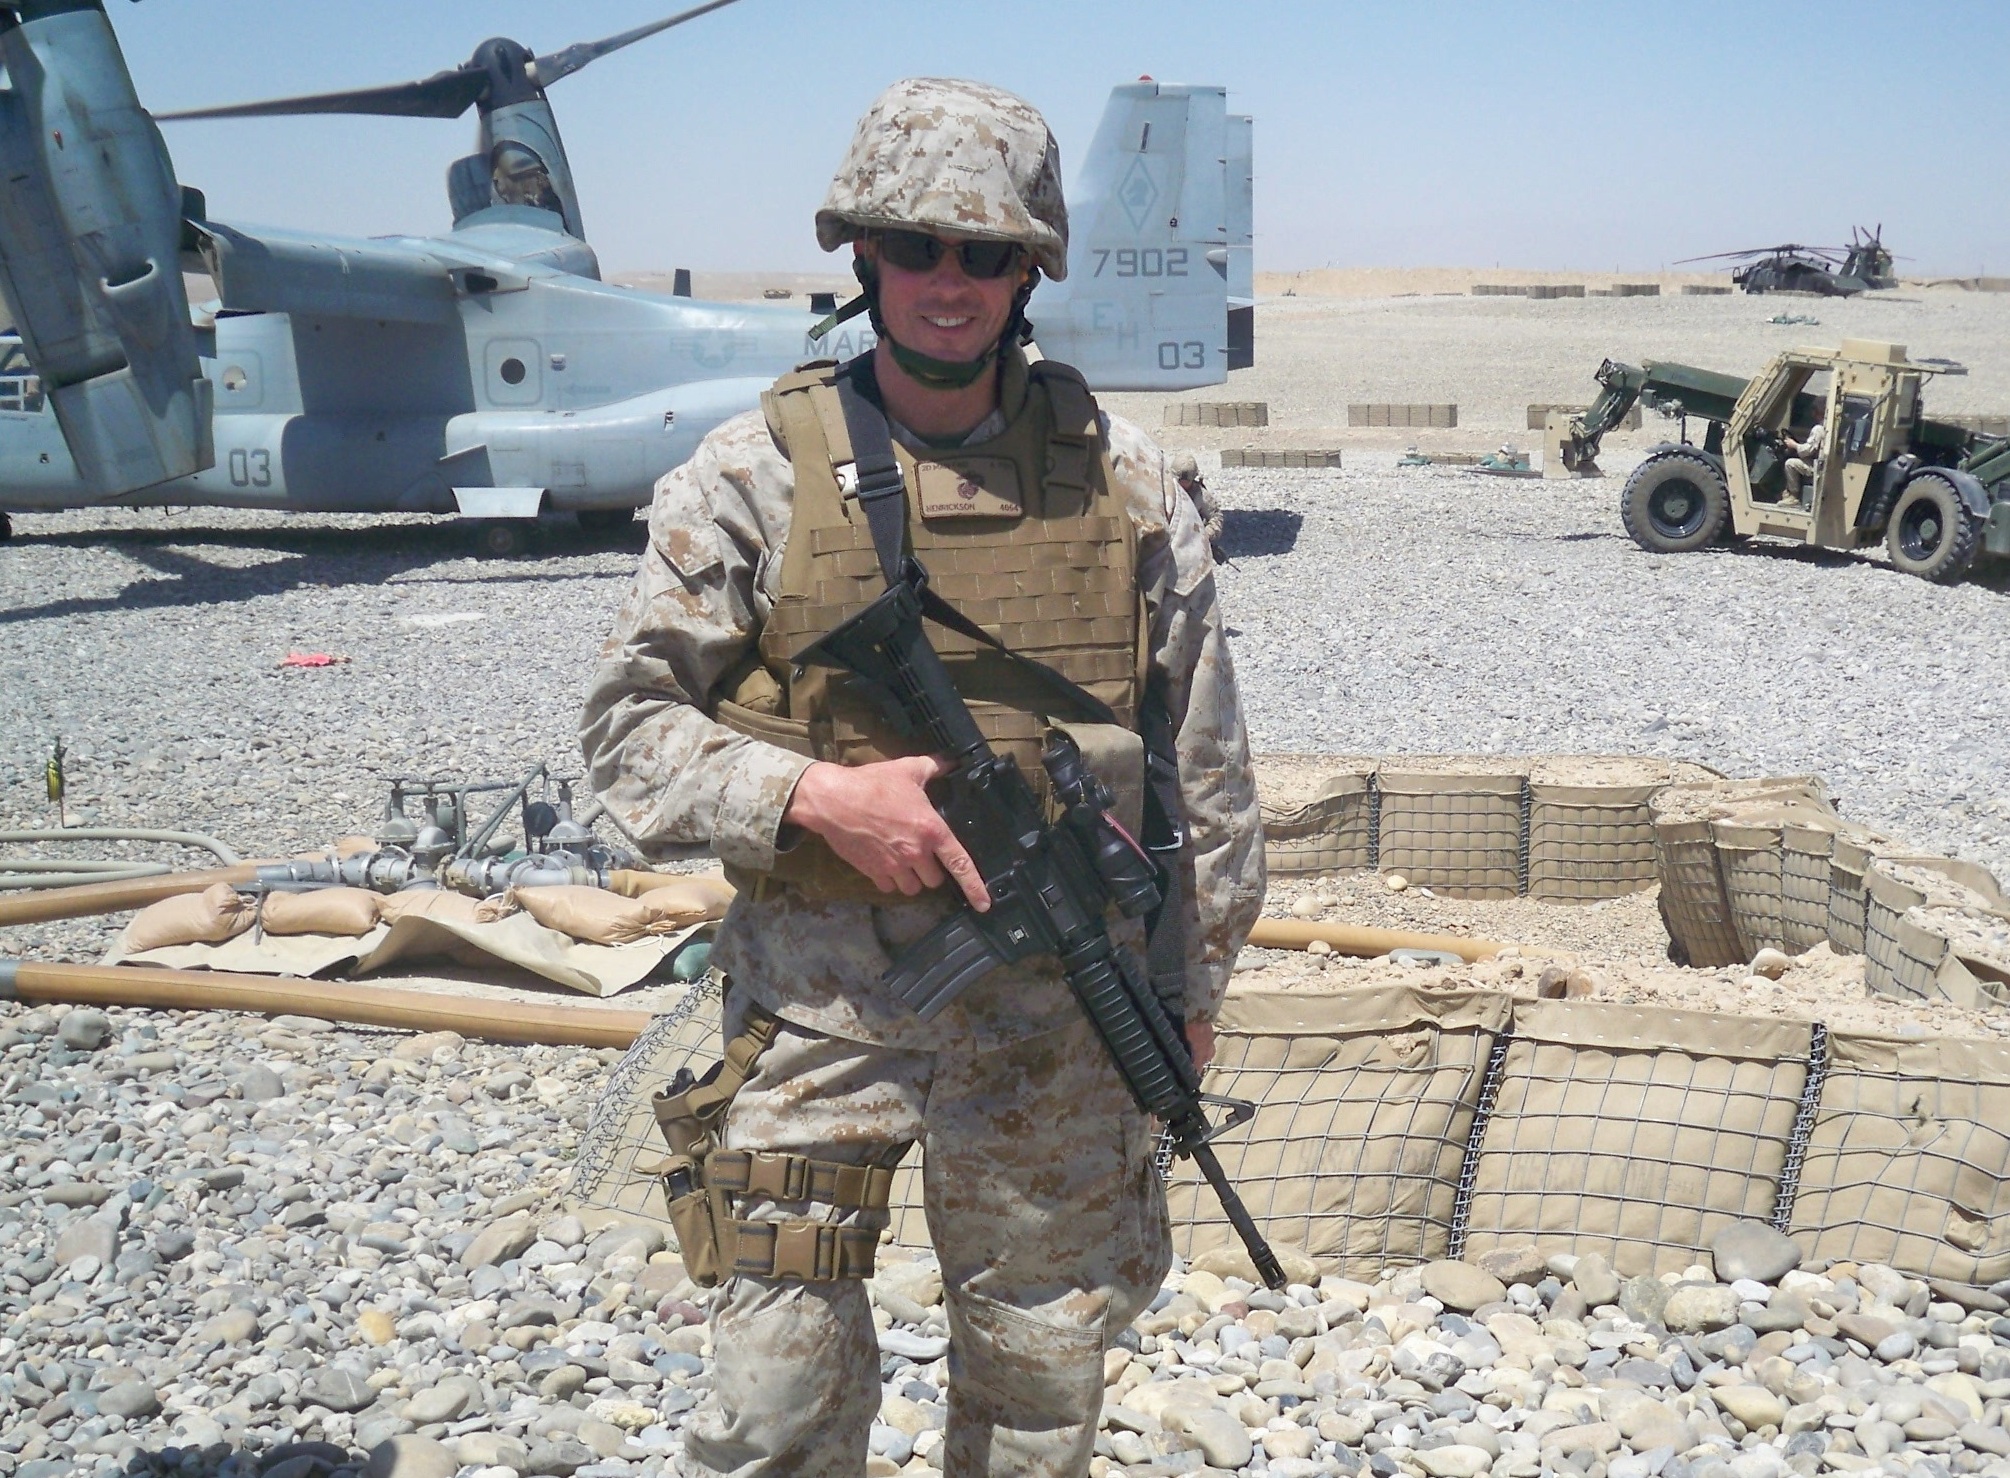 Lt. Col. Sean Henrickson, U.S. Marine Corps, Virginia Tech Corps of Cadets Class of 1996 in Afghanistan